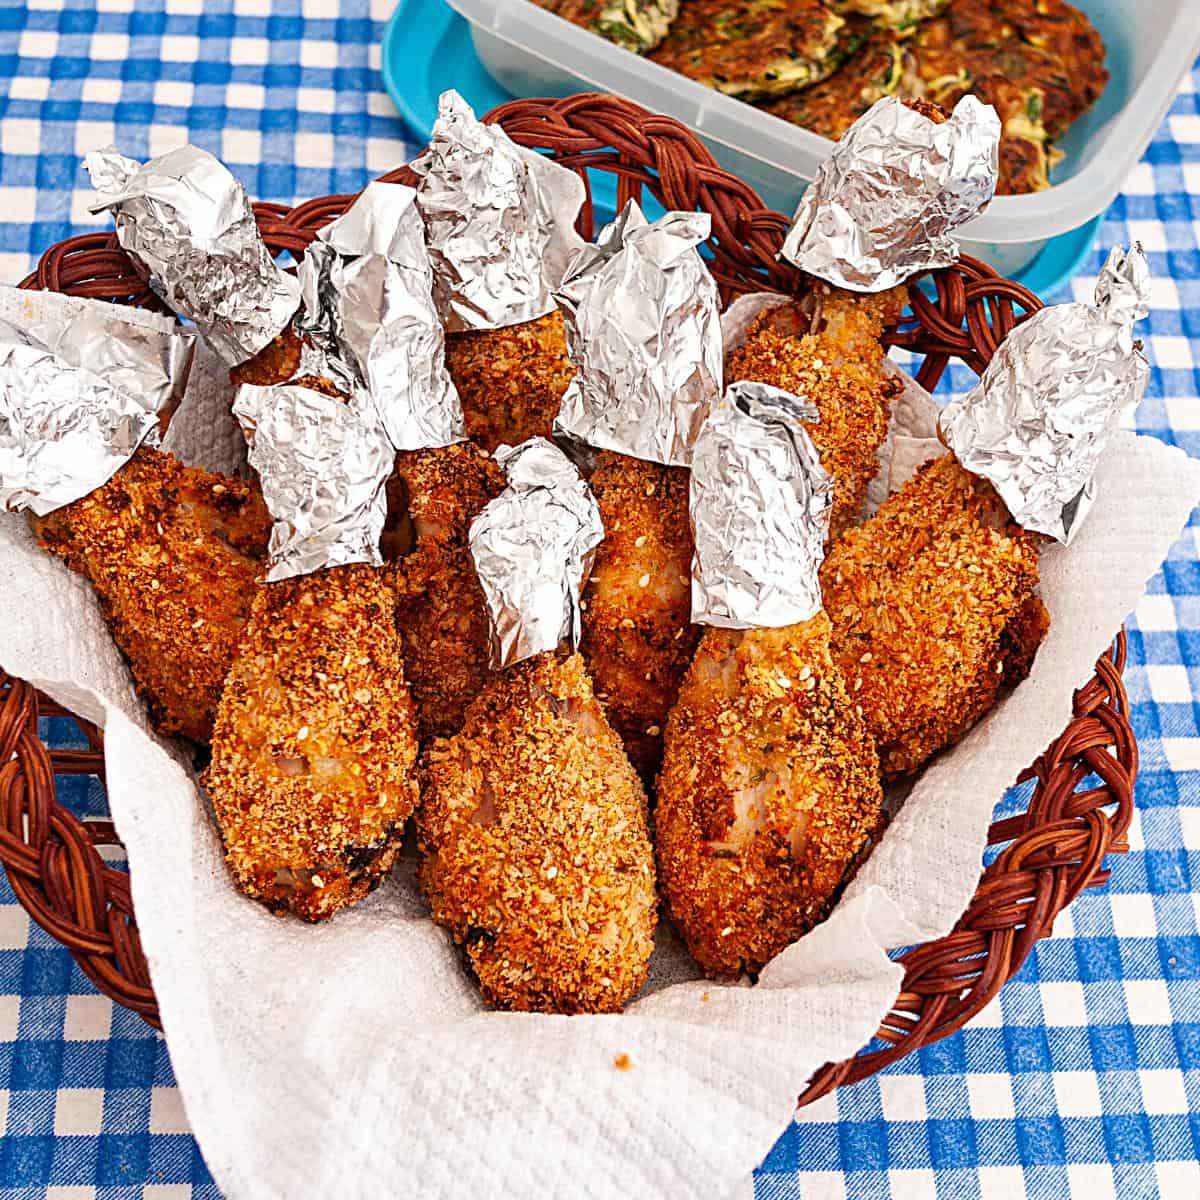 A basket with oven baked chicken legs.